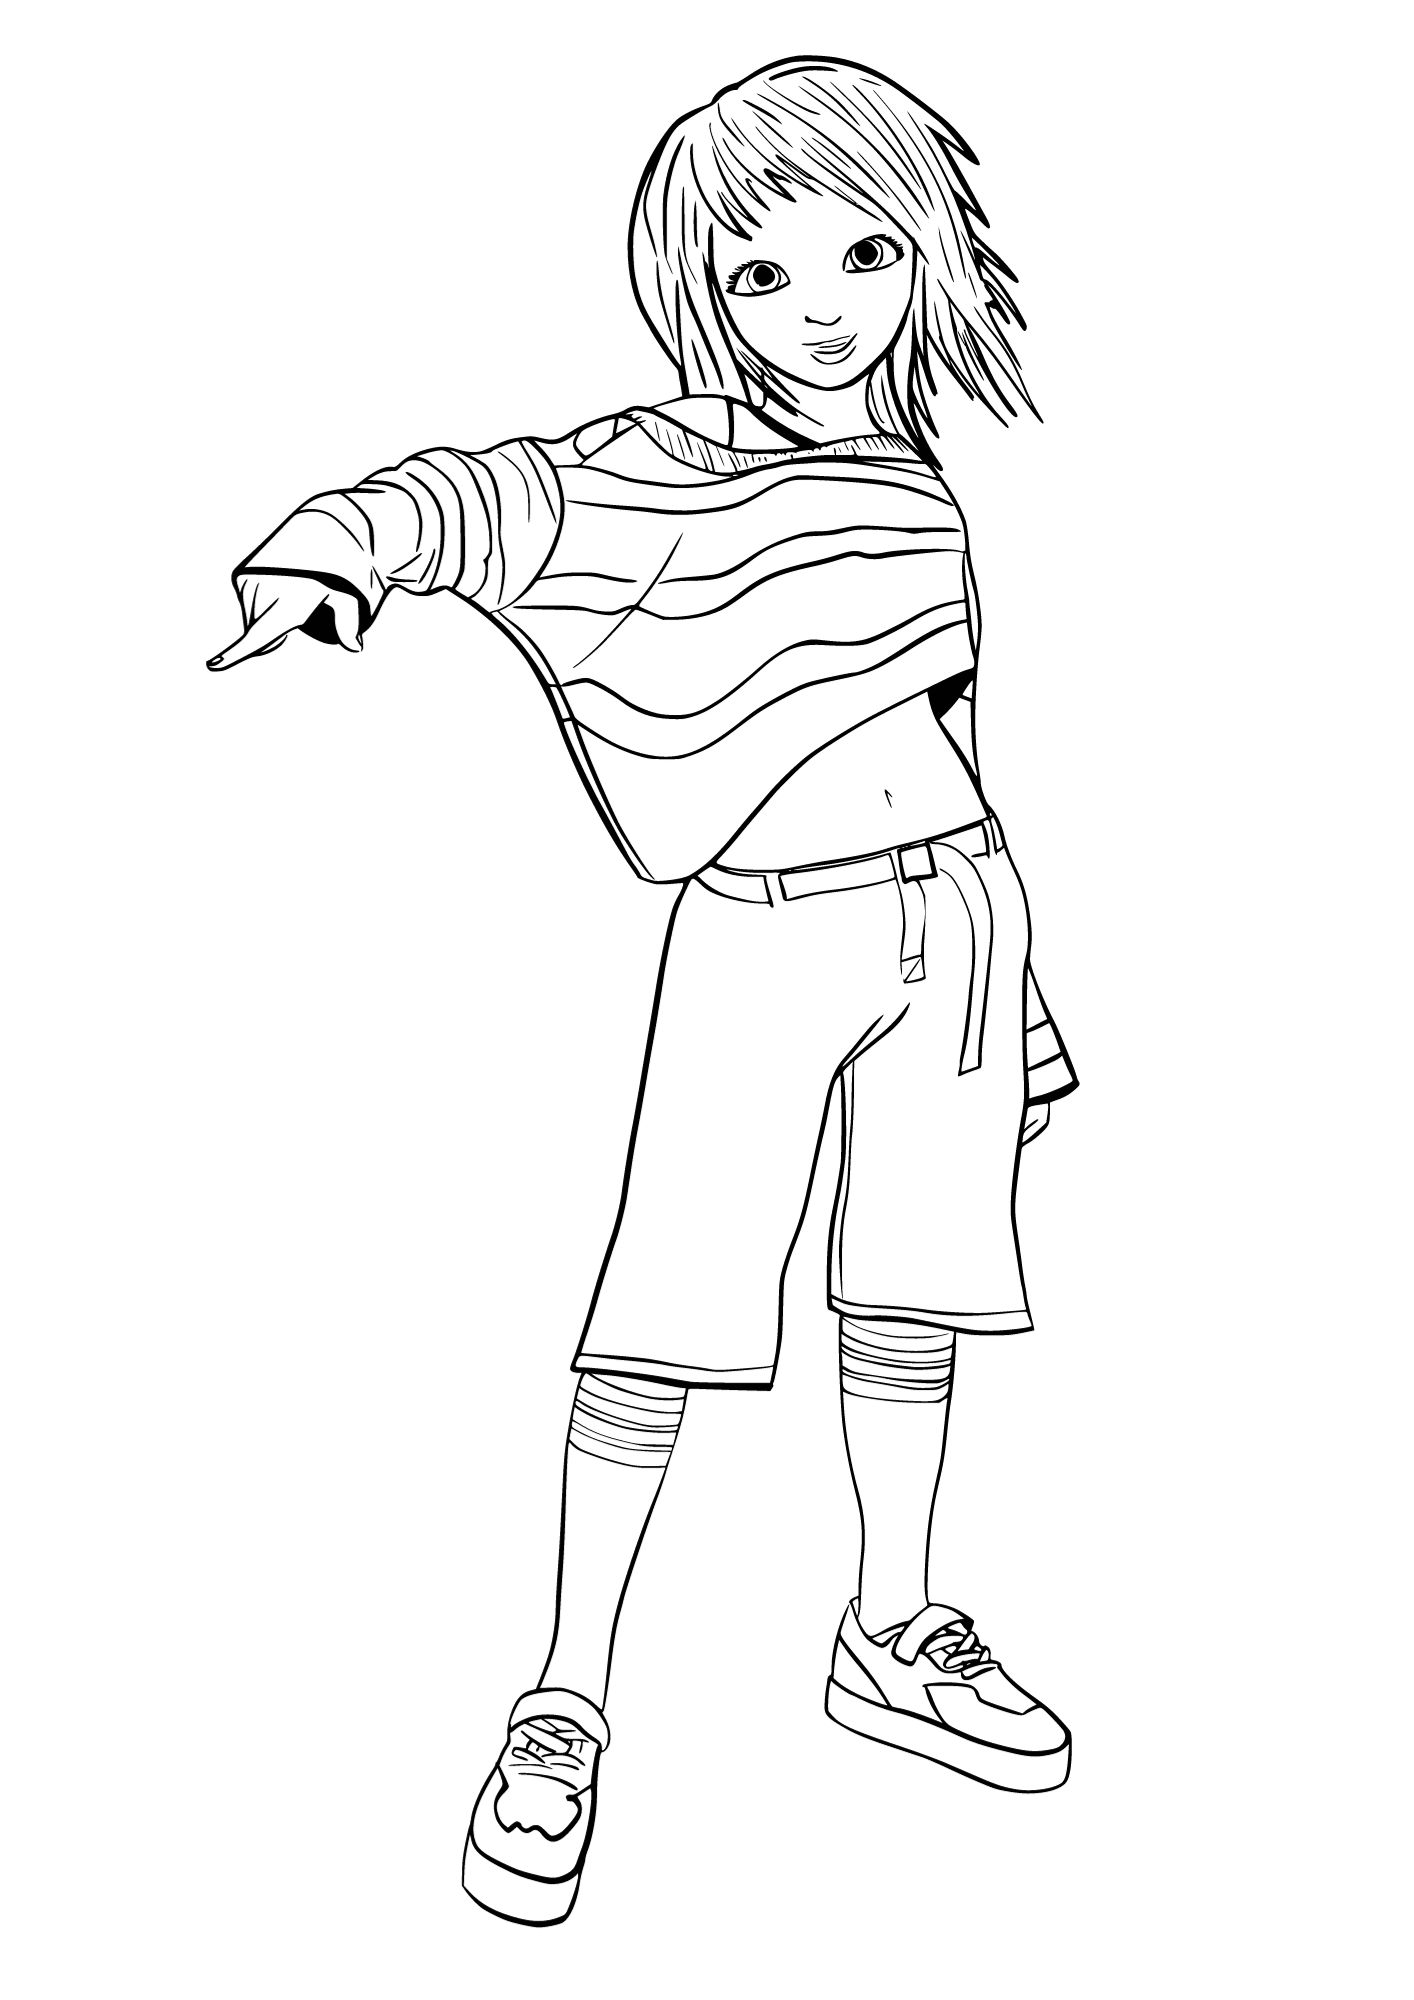 Street style girl coloring page